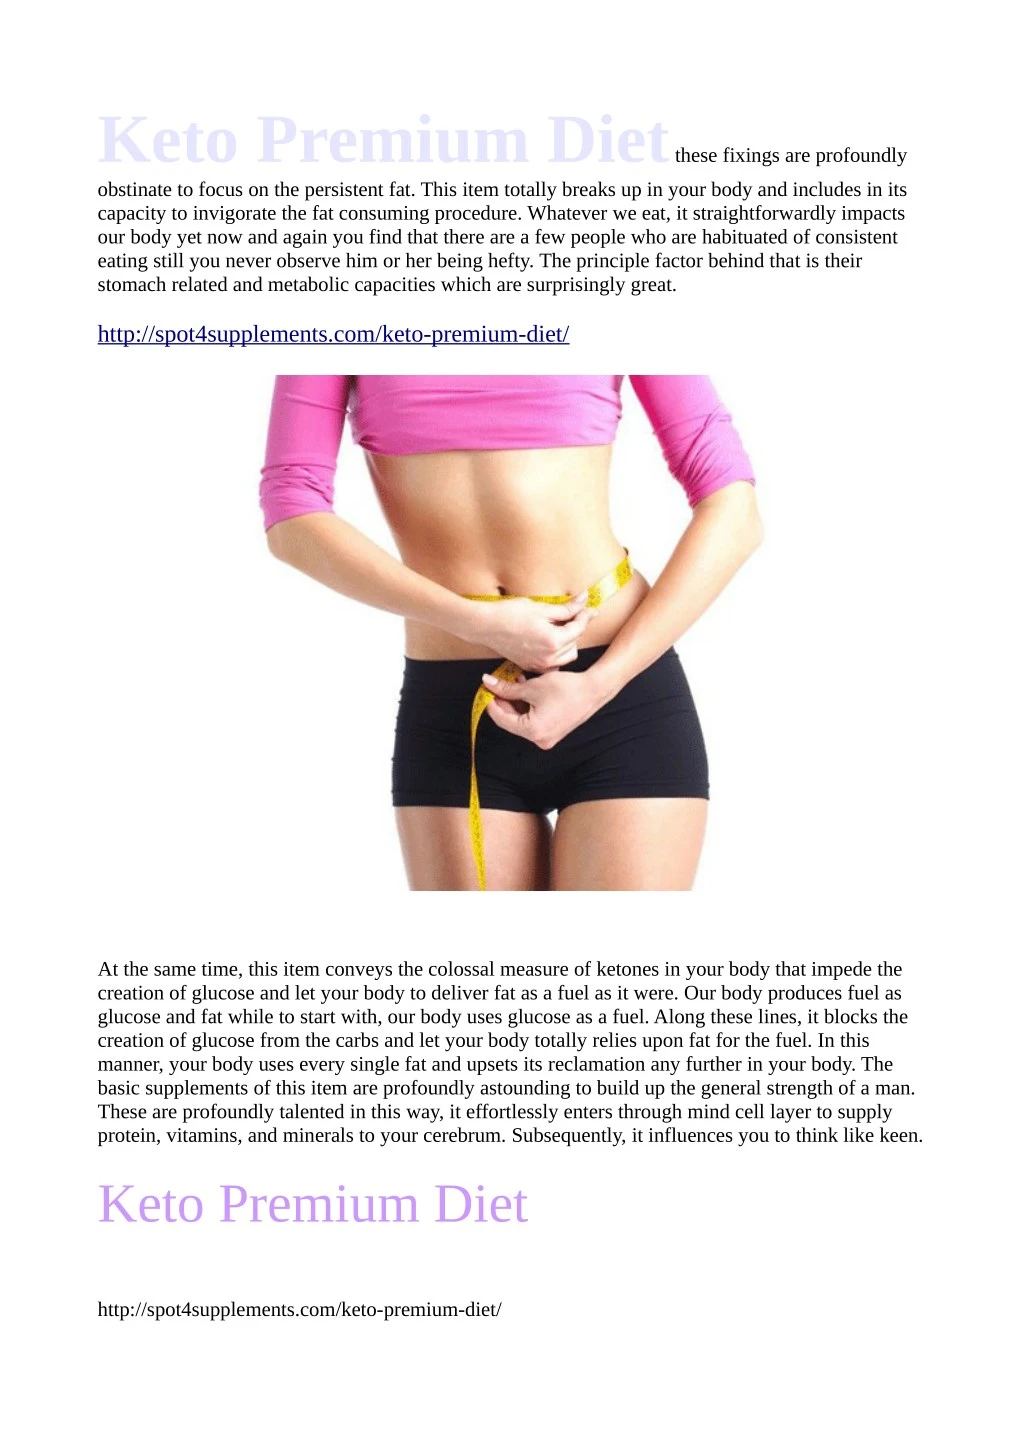 keto premium diet these fixings are profoundly